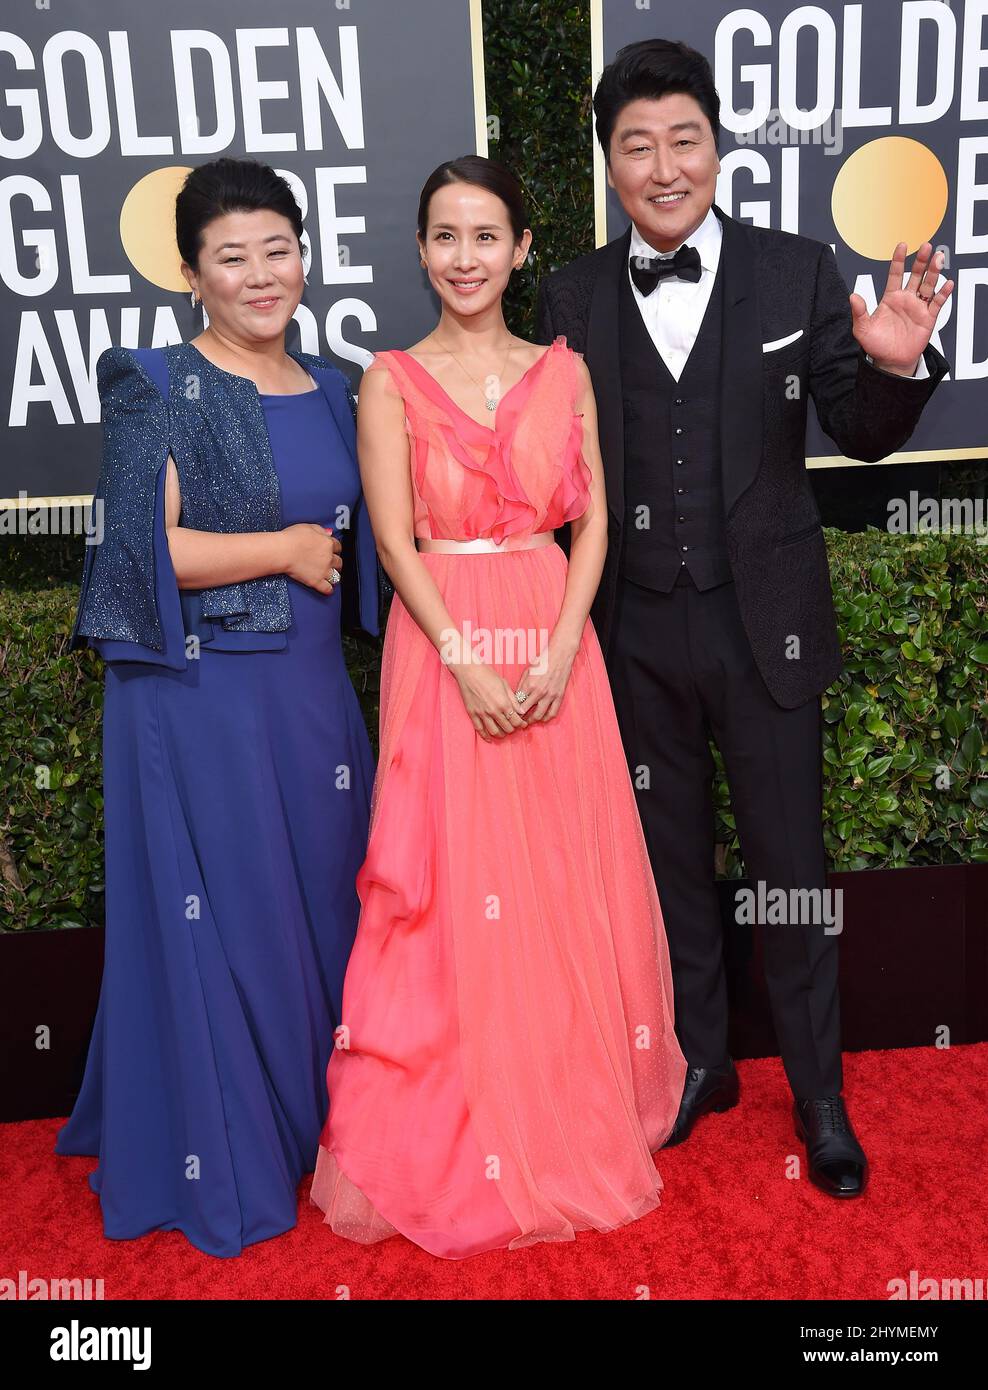 Lee Jeong-eun, Cho Yeo-jeong and Song Kang-ho at the 77th Golden Globe Awards held at the Beverly Hilton Hotel on January 5, 2020 in Beverly Hills, Los Angeles. Stock Photo